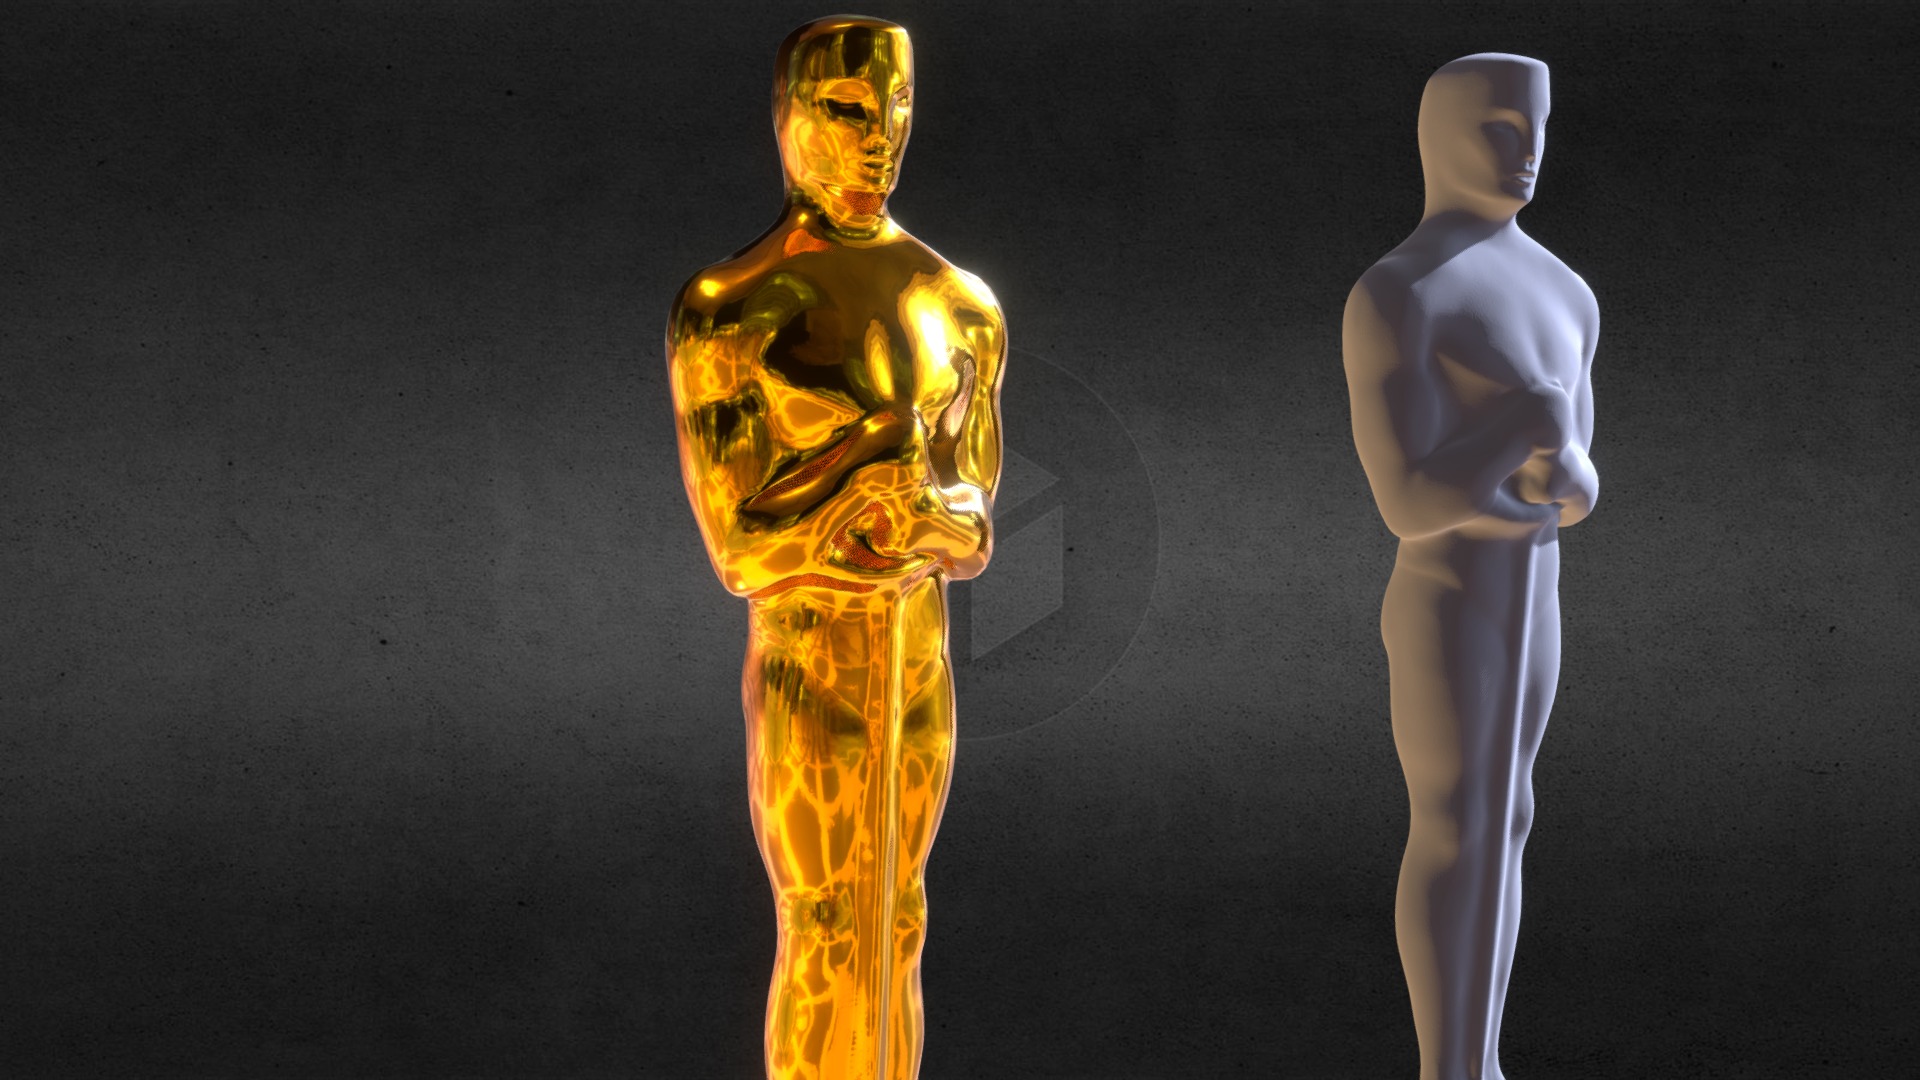 3D model Statuette inspired of Oscars. - This is a 3D model of the Statuette inspired of Oscars.. The 3D model is about a pair of mannequins wearing white robes and gold pants.